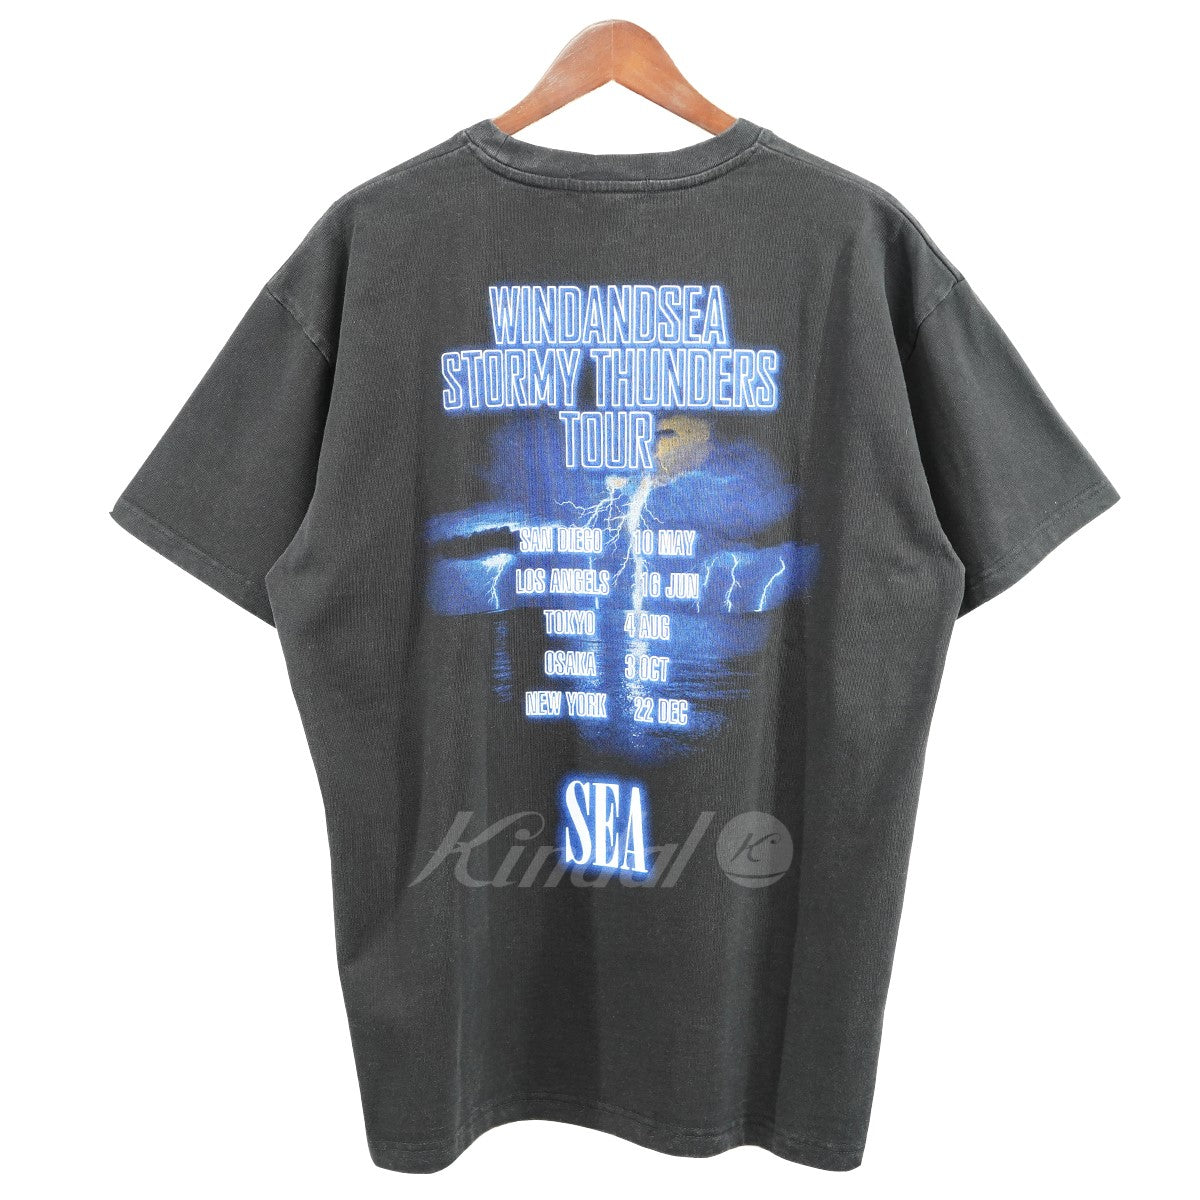 WIND AND SEA(ウィンドアンドシー) 23AW Metal Tee メタル ロゴ ツアー